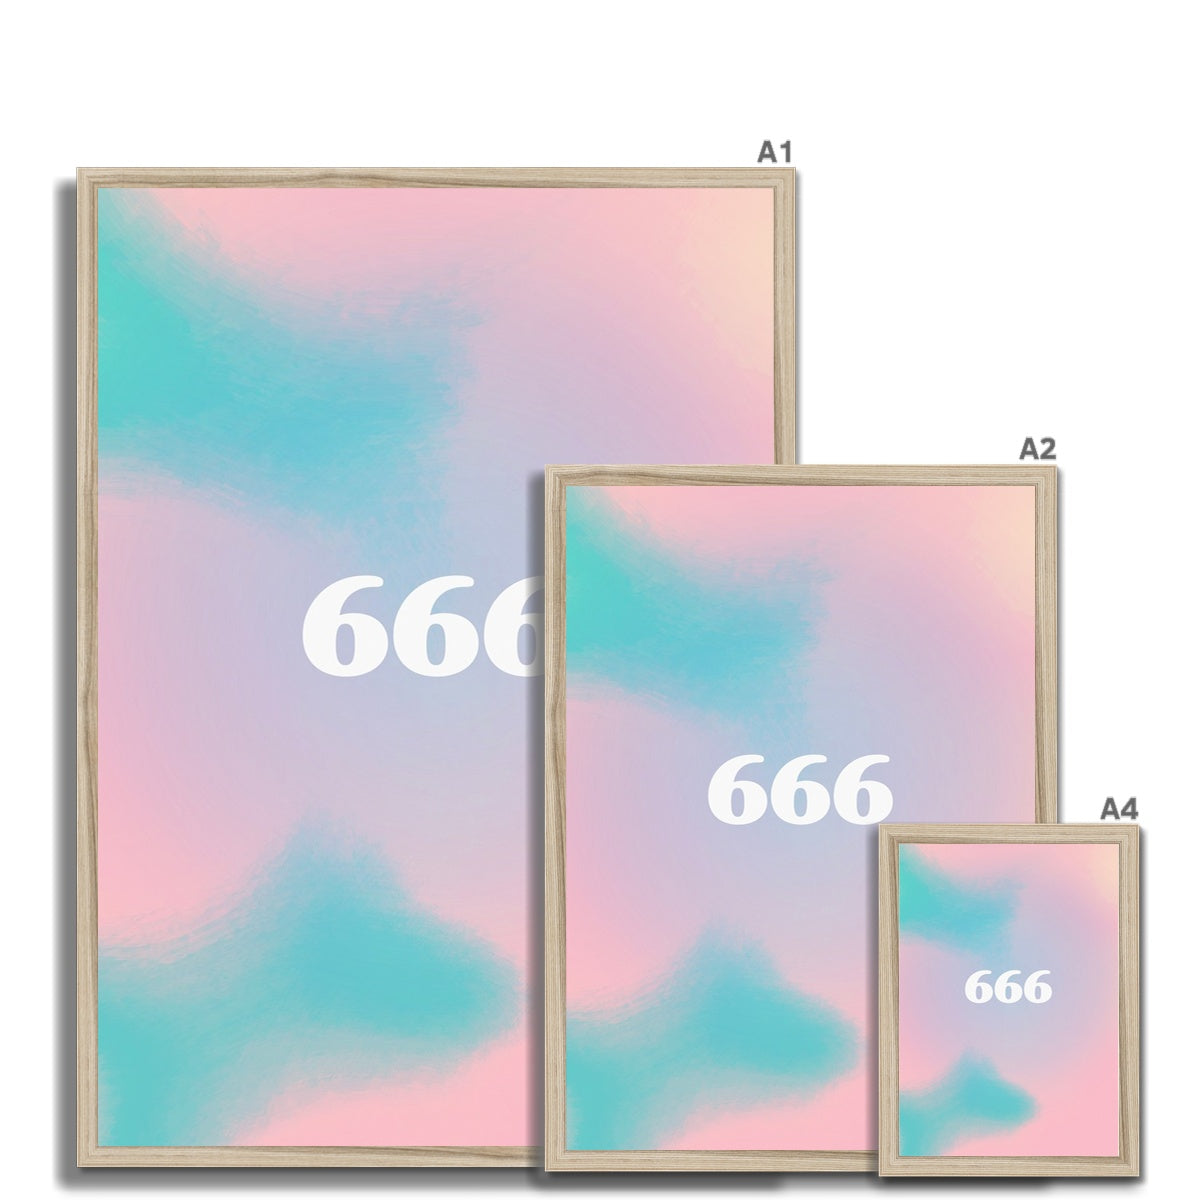 An angel number art print with a gradient aura. Add a touch of angel energy to your walls with a angel number auras. The perfect wall art posters to create a soft and dreamy aesthetic with your apartment or dorm decor. 666 Reflect: It Is Time To Wake Up To Your Higher Spiritual Truth.